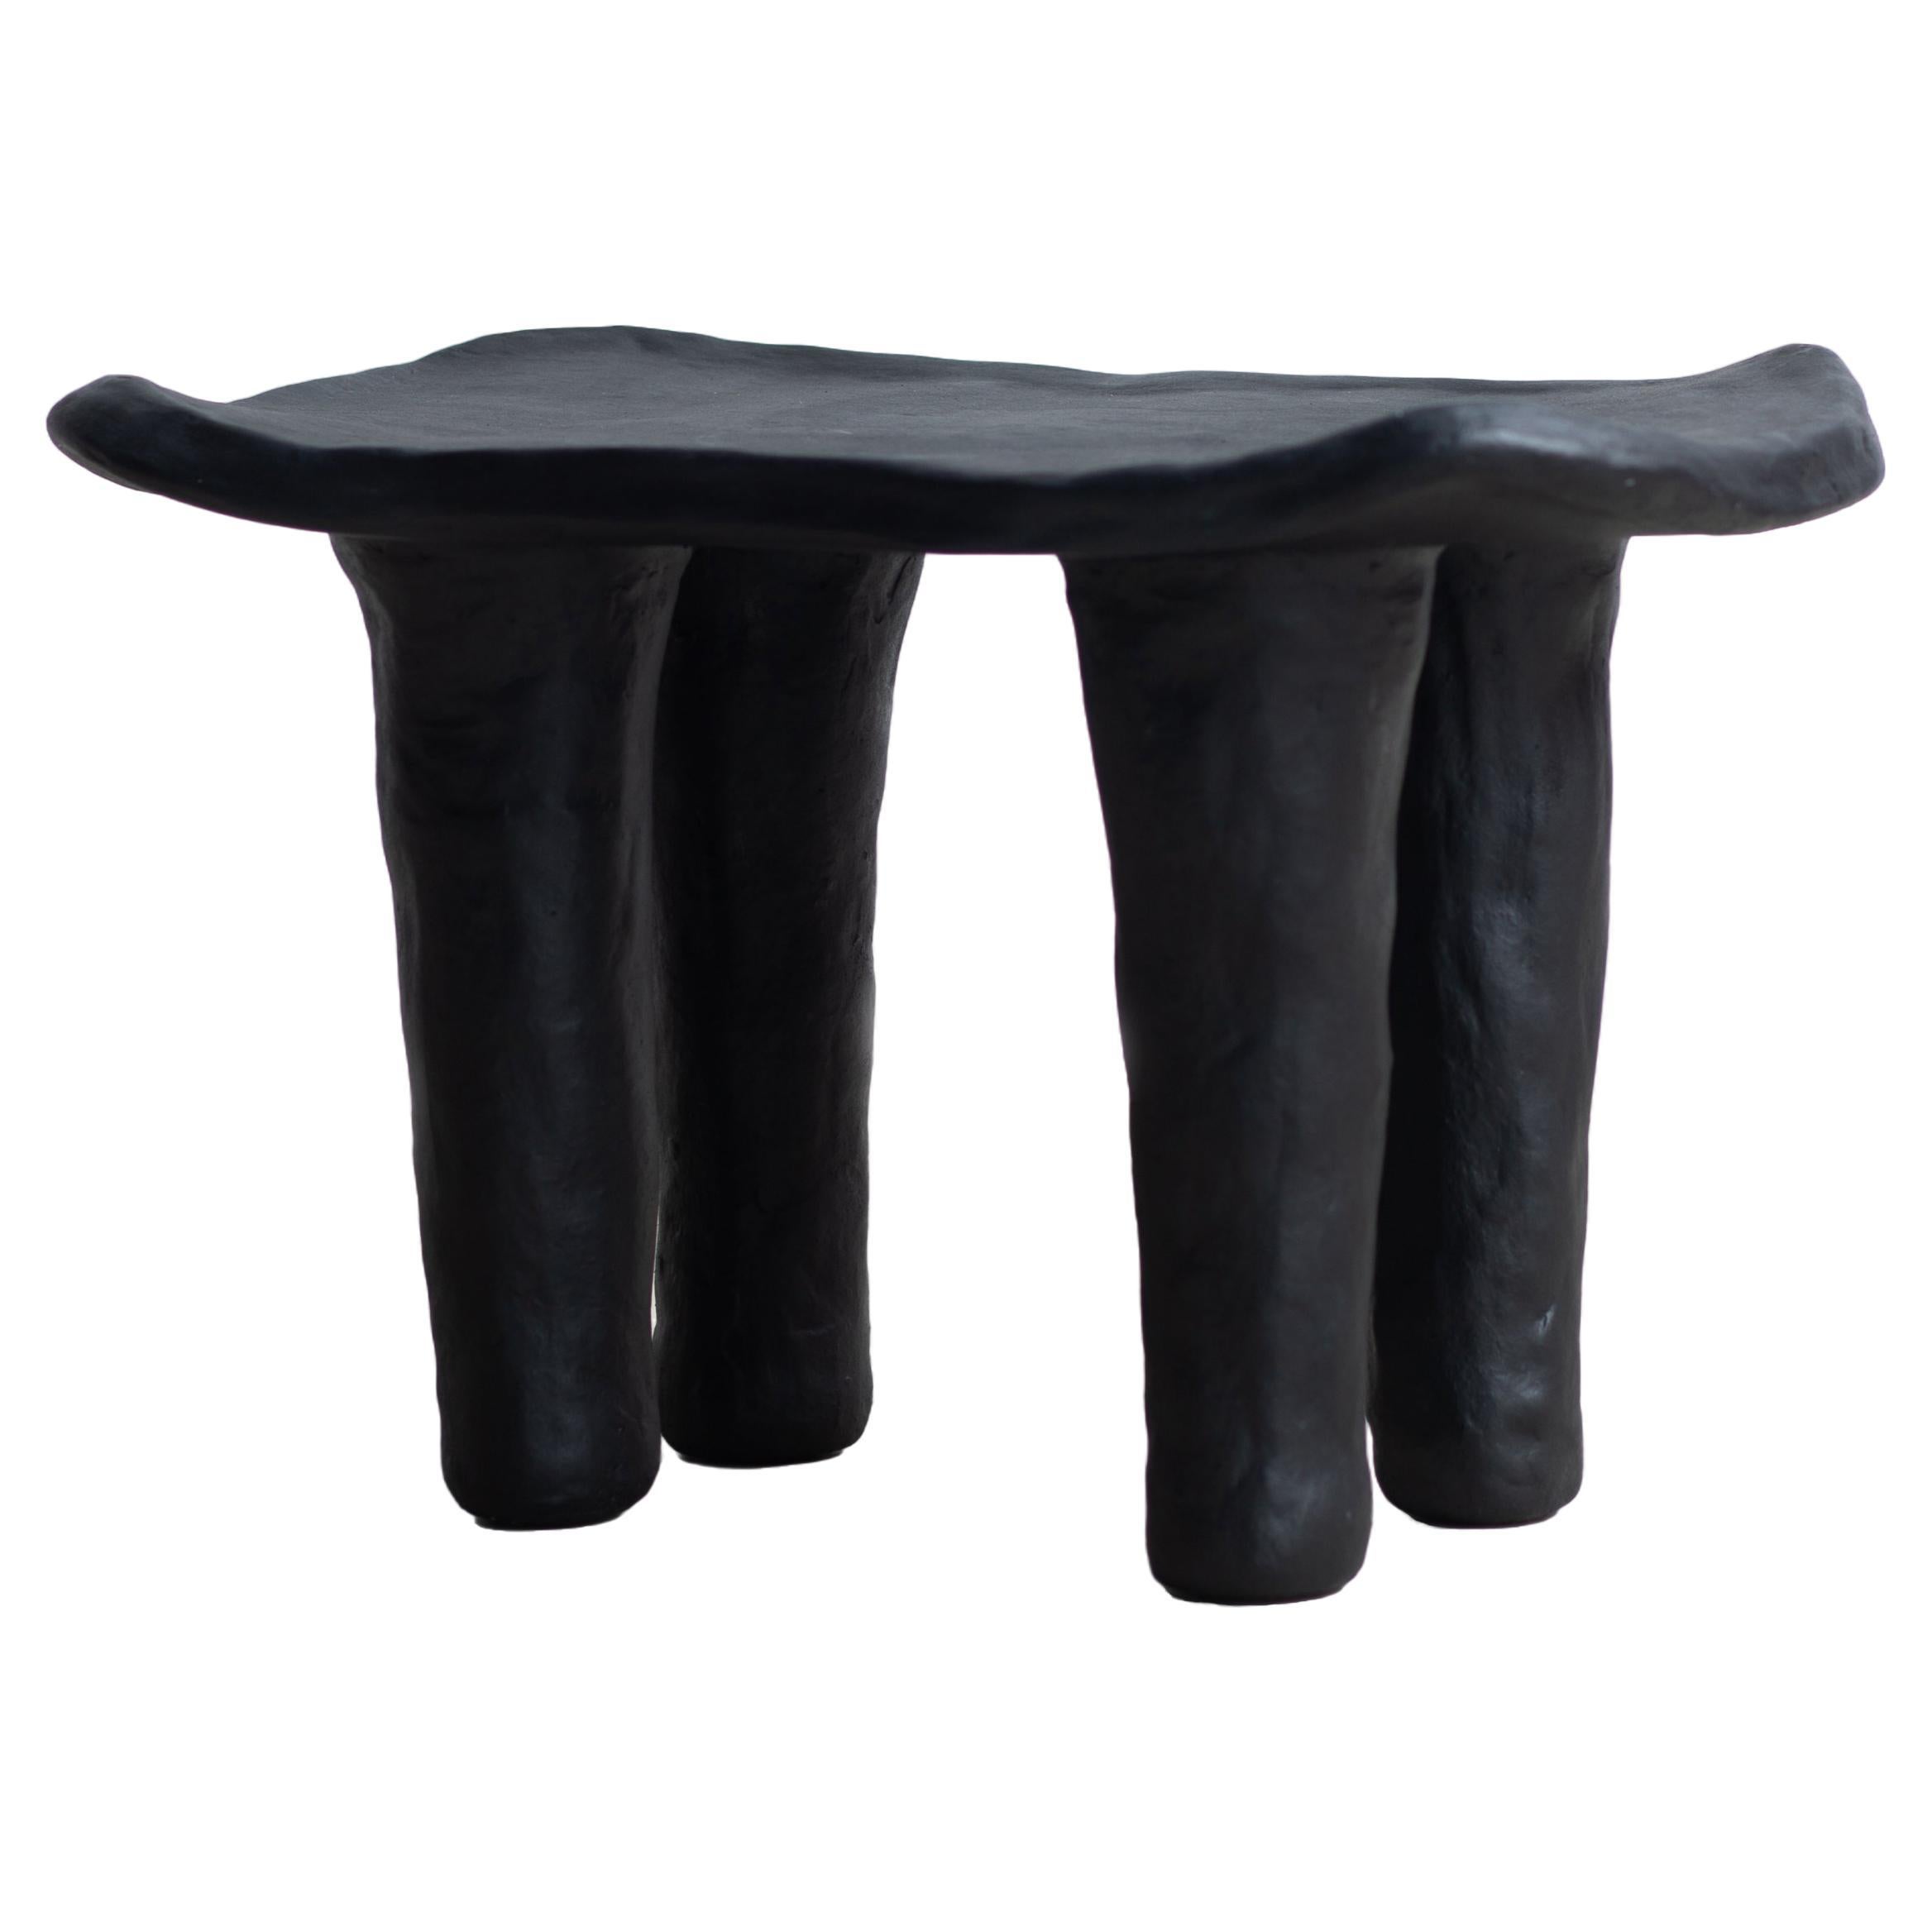 Quattuor Stool by Isin Sezgi Avci For Sale